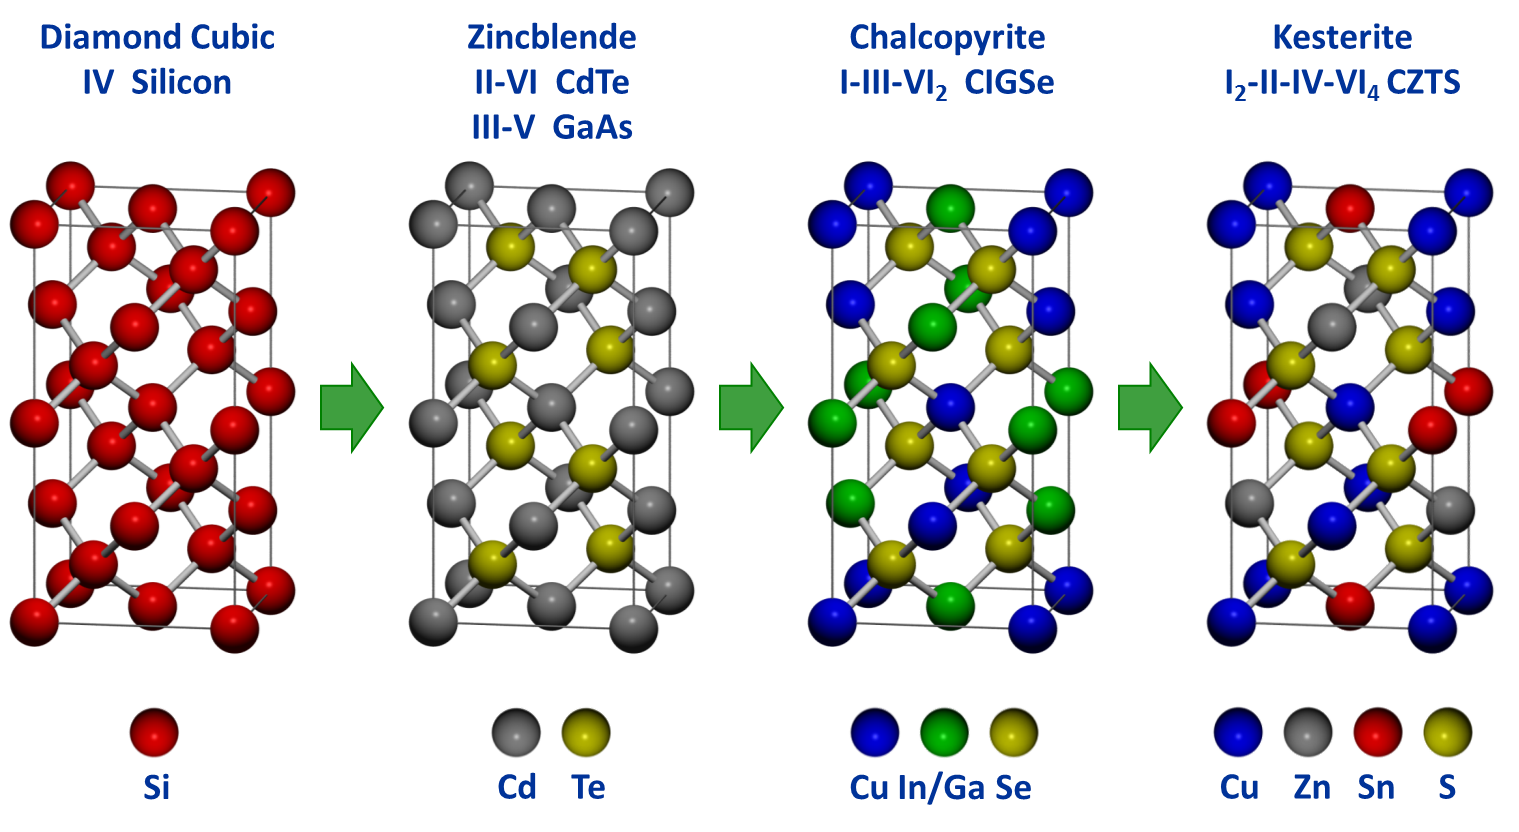 Crystal structures of semiconductor materials.